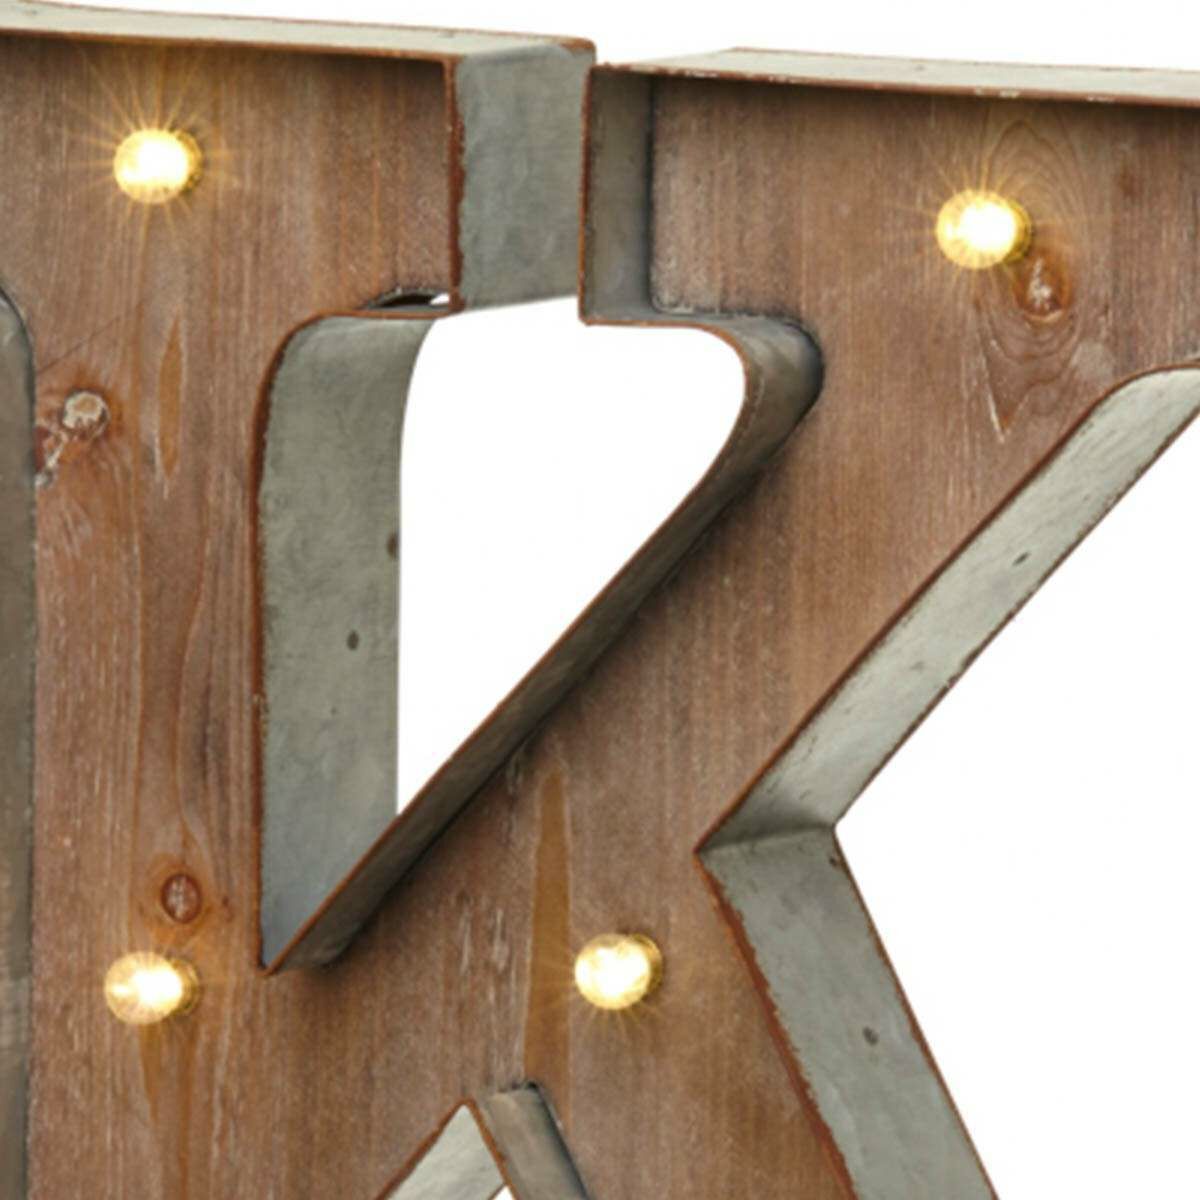 Wood & Metal 'K' Battery Light Up Circus Letter, 41cm image 1